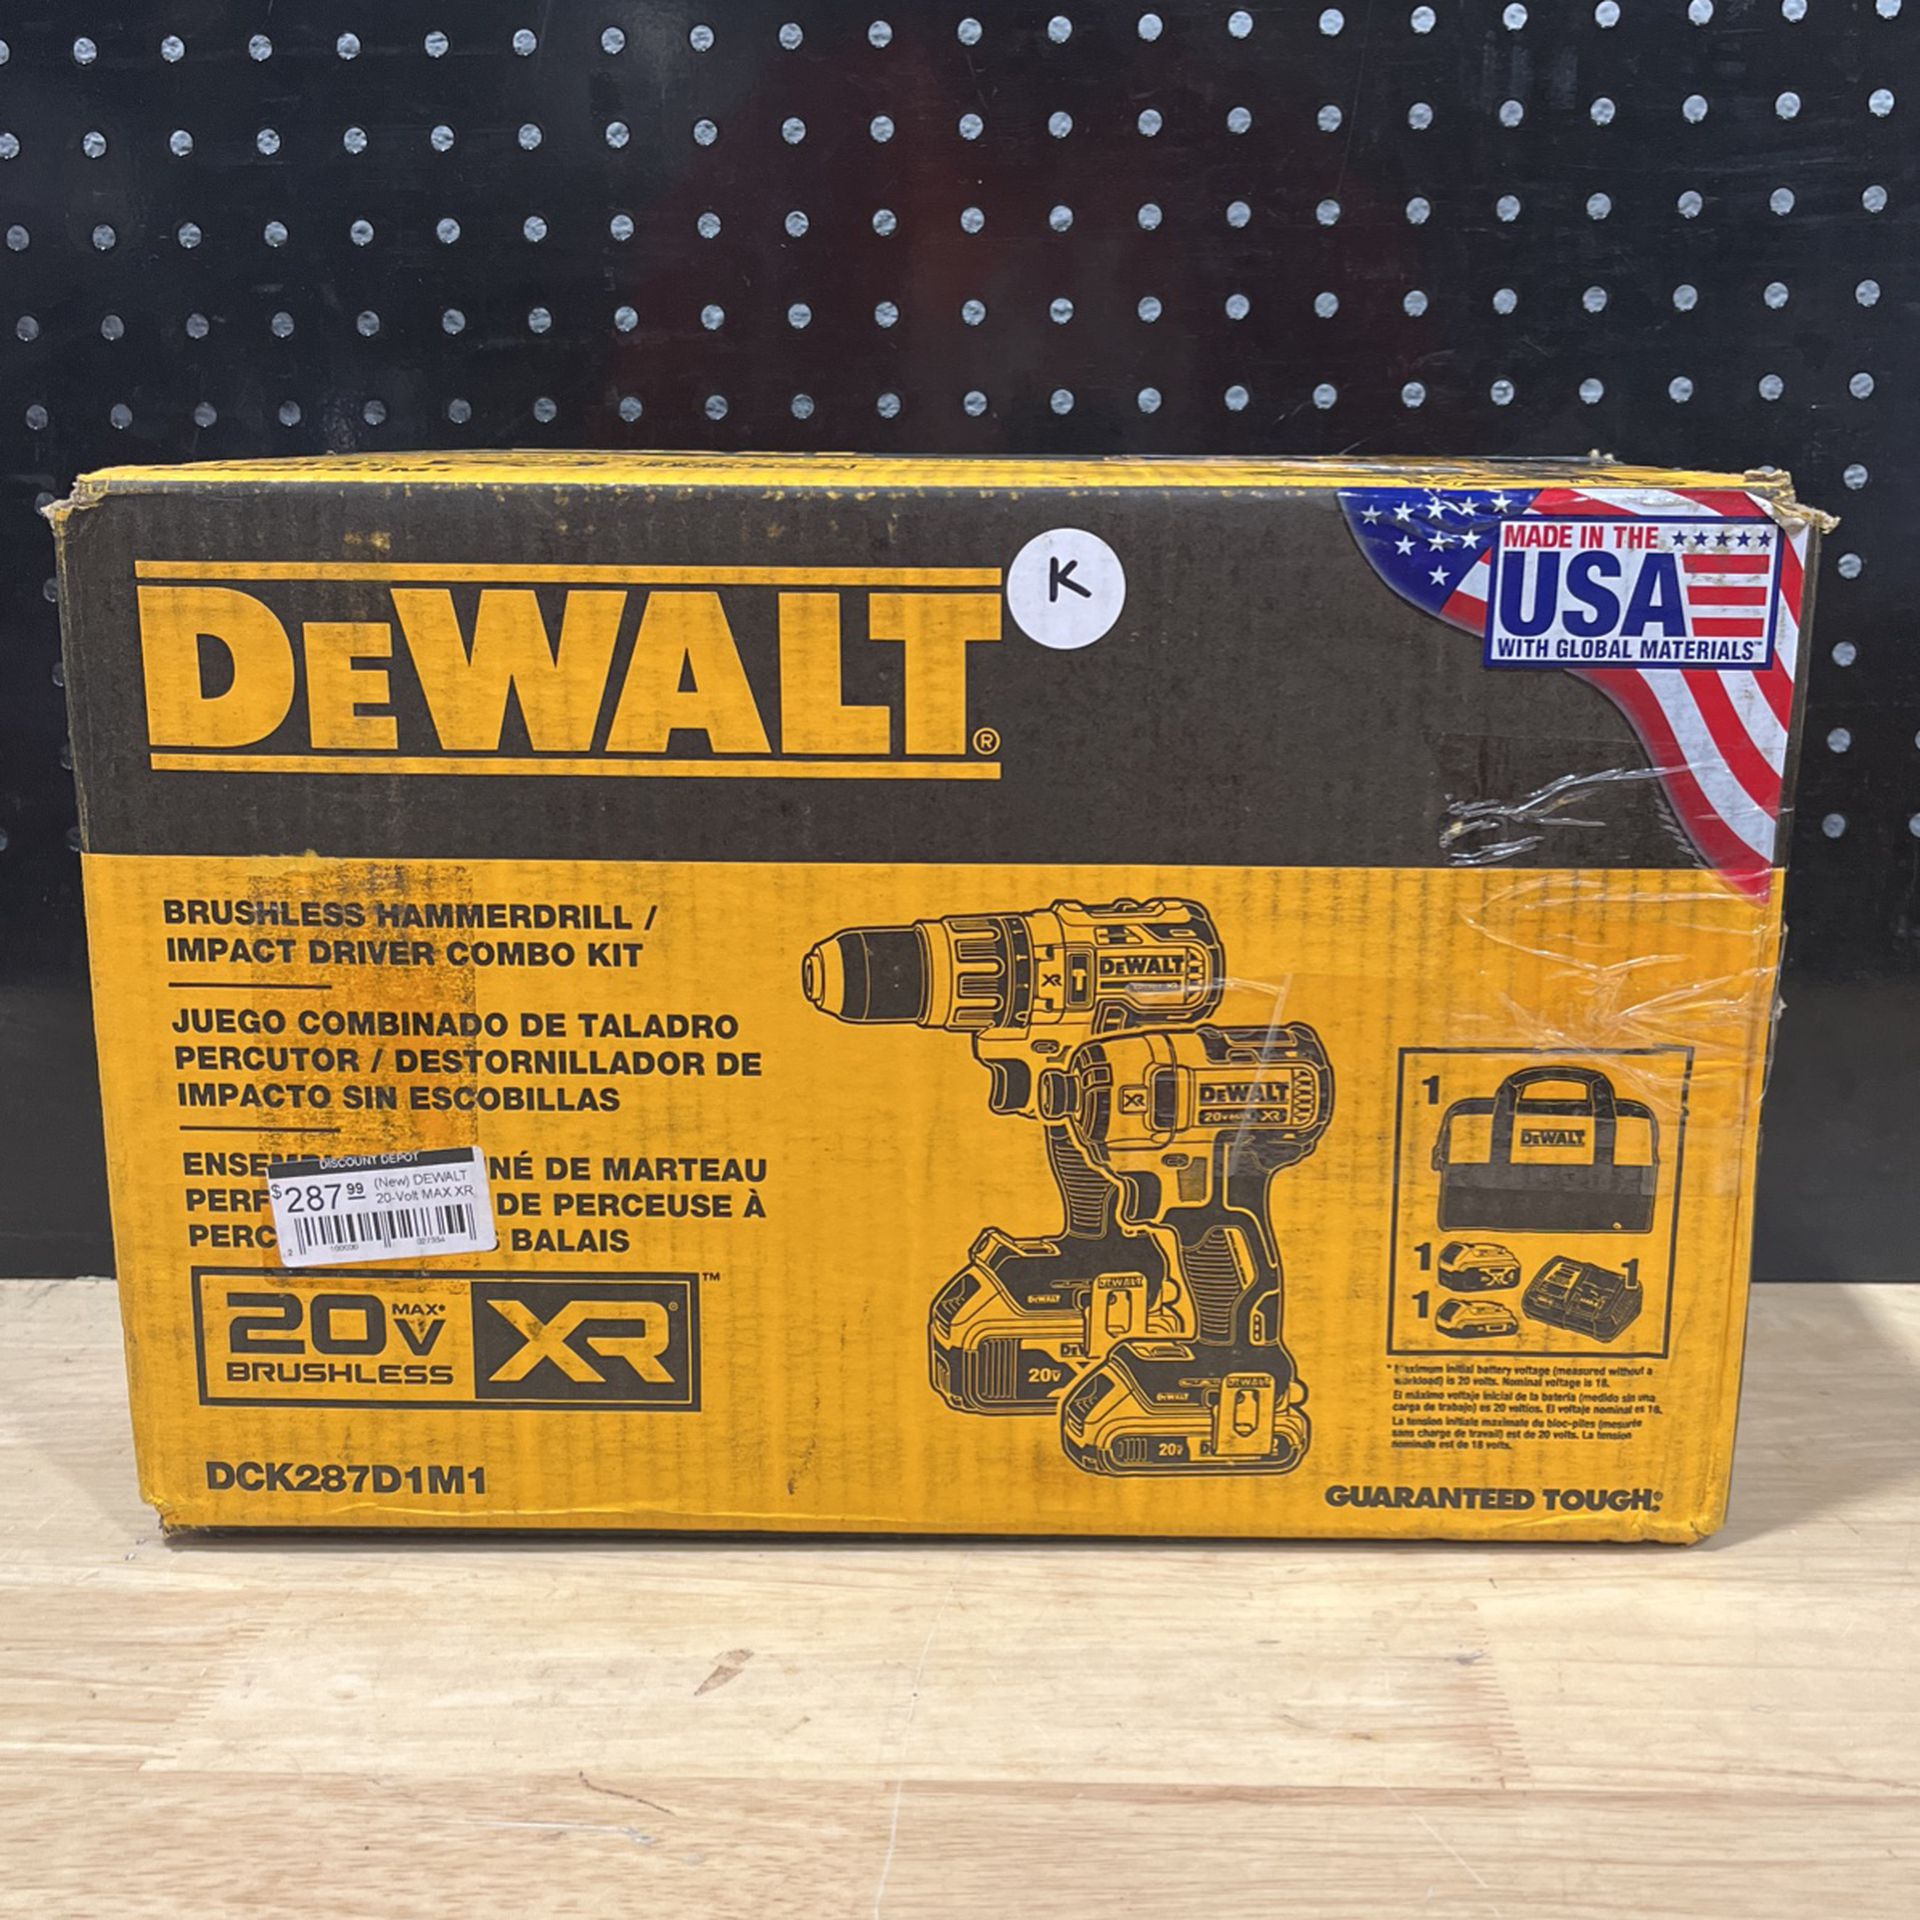 DEWALT 20V MAX XR Cordless Brushless Hammer Drill/Impact Tool Combo Kit  with (1) 4.0Ah Battery and (1) 2.0Ah Battery for Sale in Phoenix, AZ  OfferUp